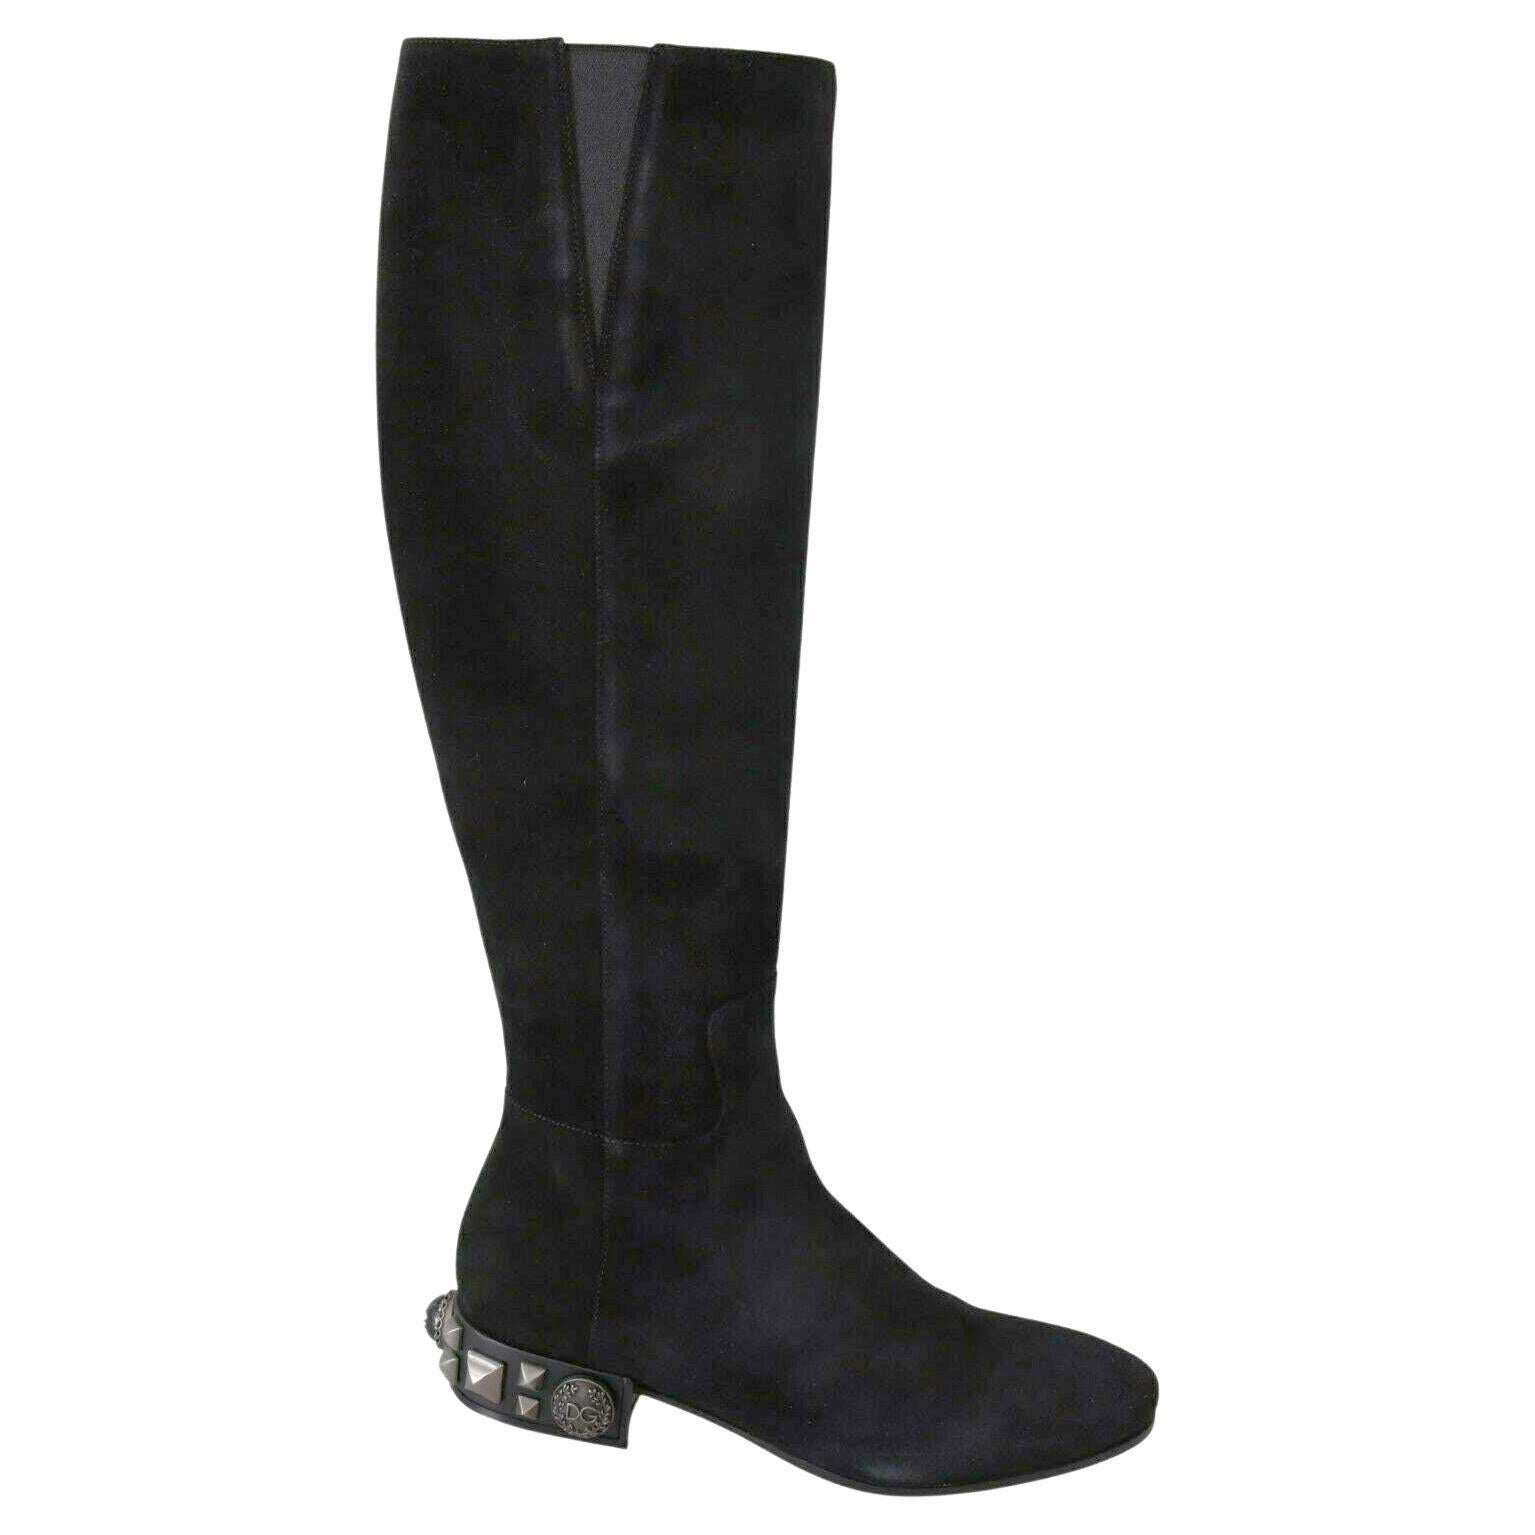 Dolce & Gabbana Black Suede Leather Flat Knee High Boots With Zipper DG Logo For Sale